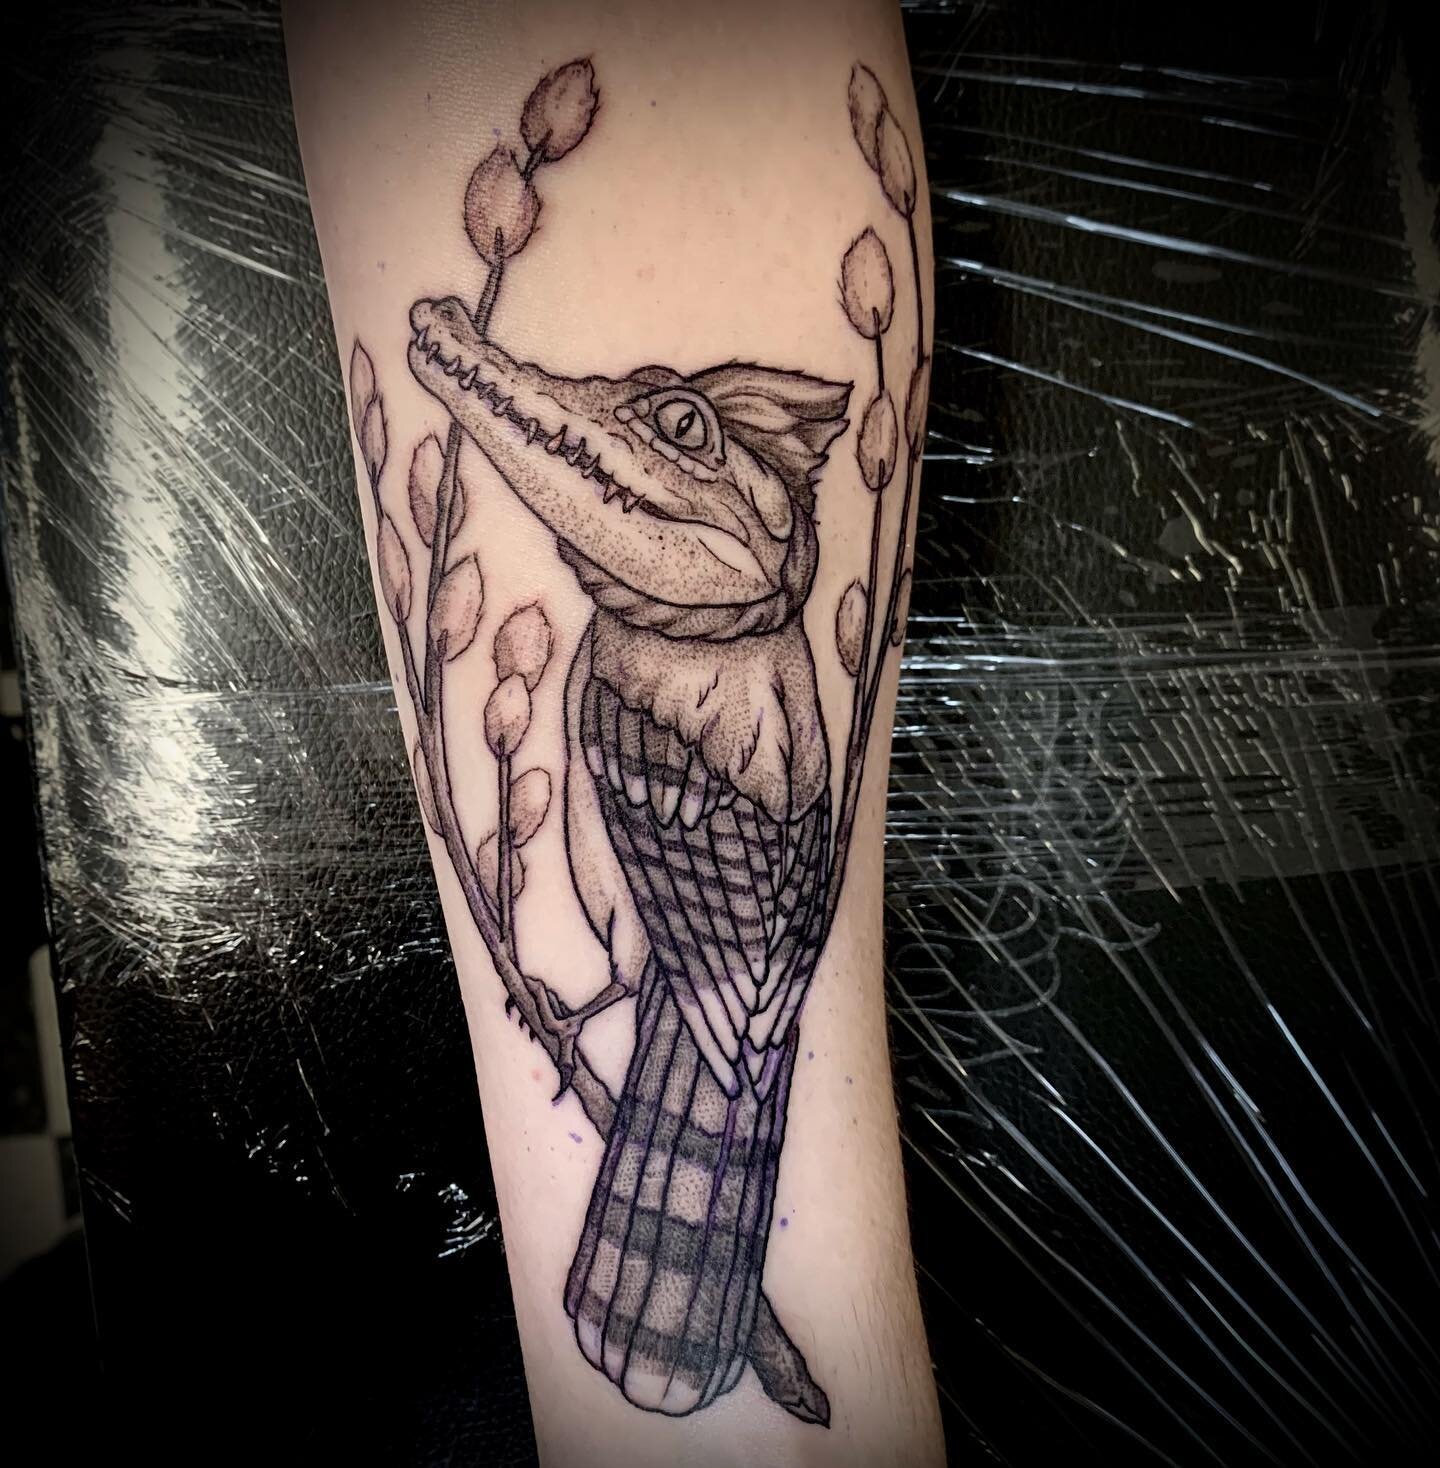 Gator guy! This was the most fun to tattoo!